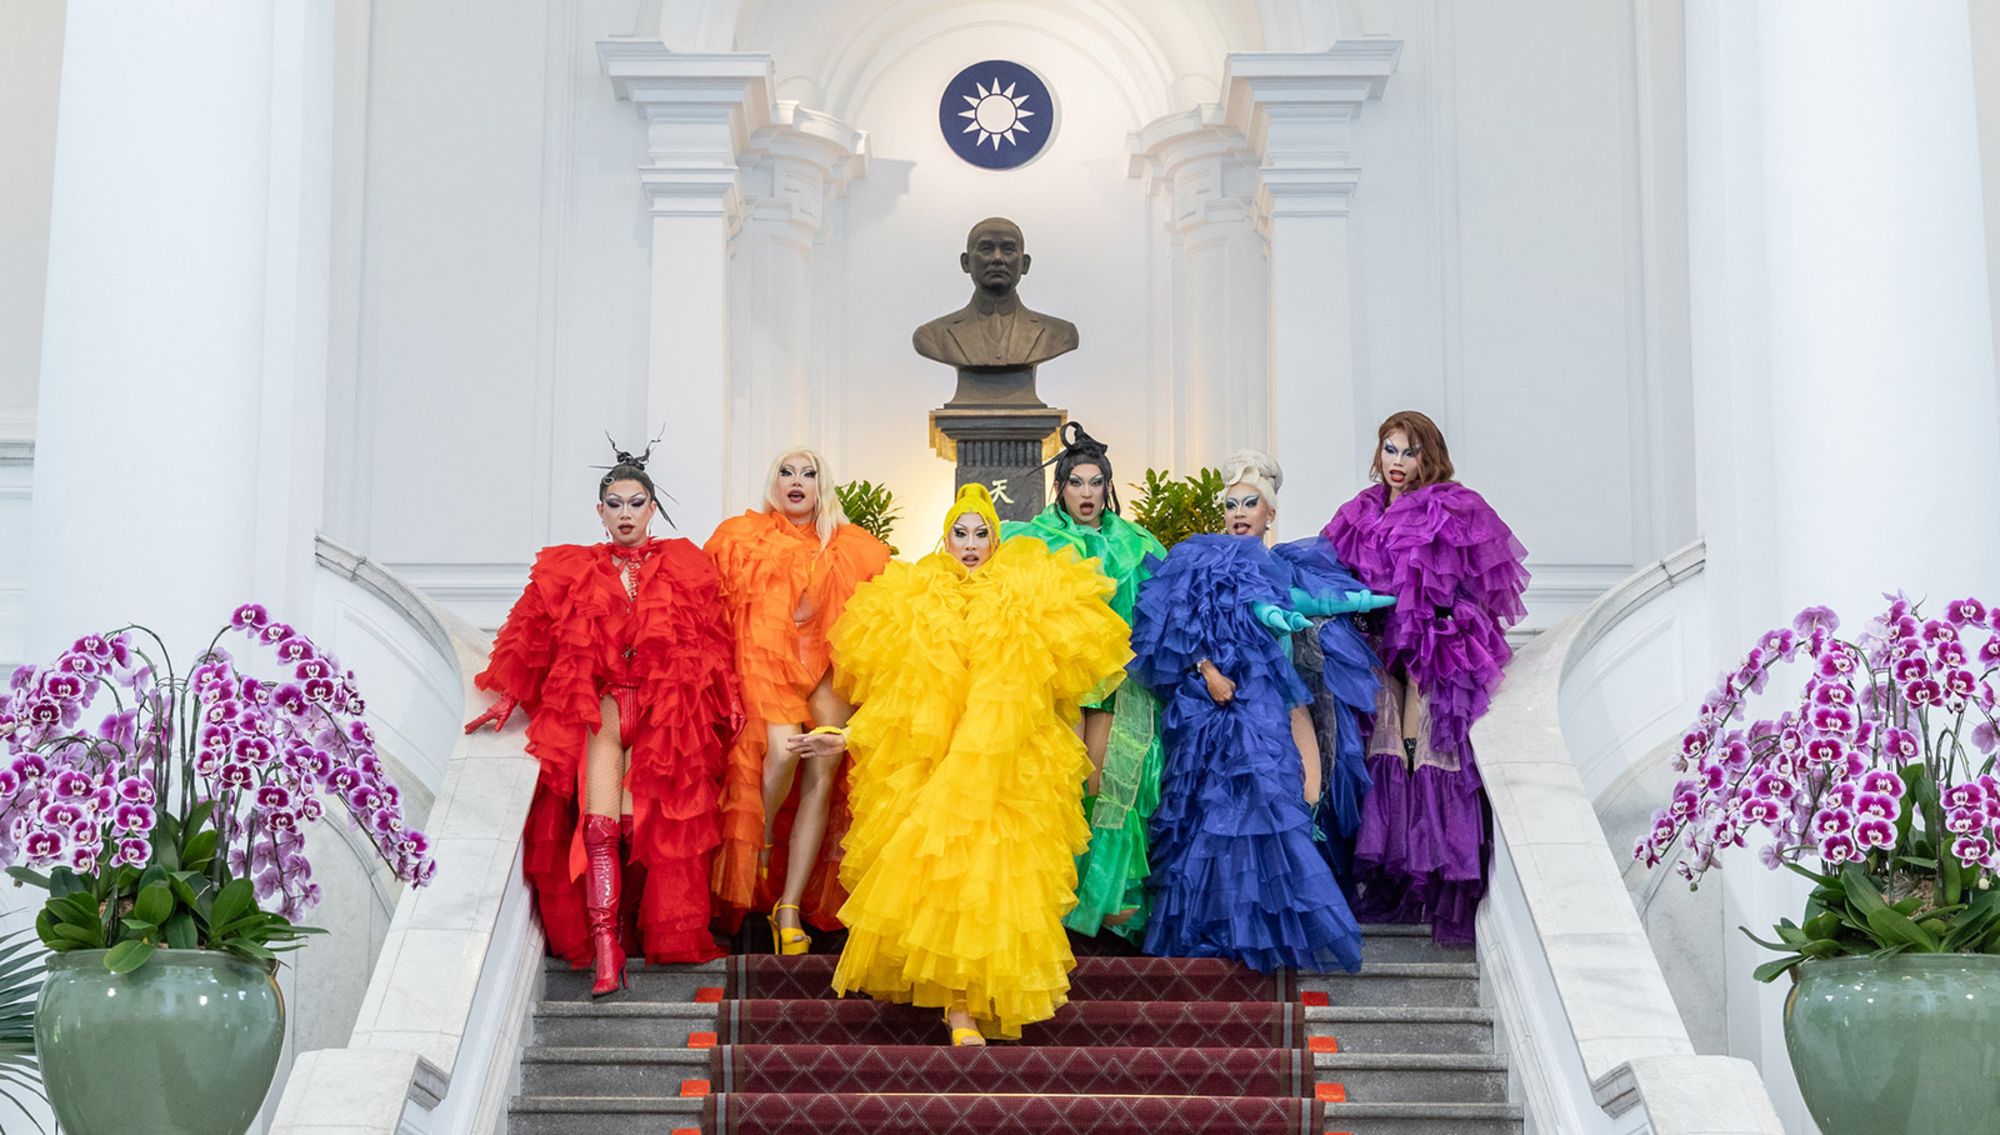 Drag queens, led by "RuPaul's Drag Race" winner Nymphia Wind, center, perform for Taiwan's outgoing leader Tsai Ing-wen at the presidential office in Taipei, Taiwan.